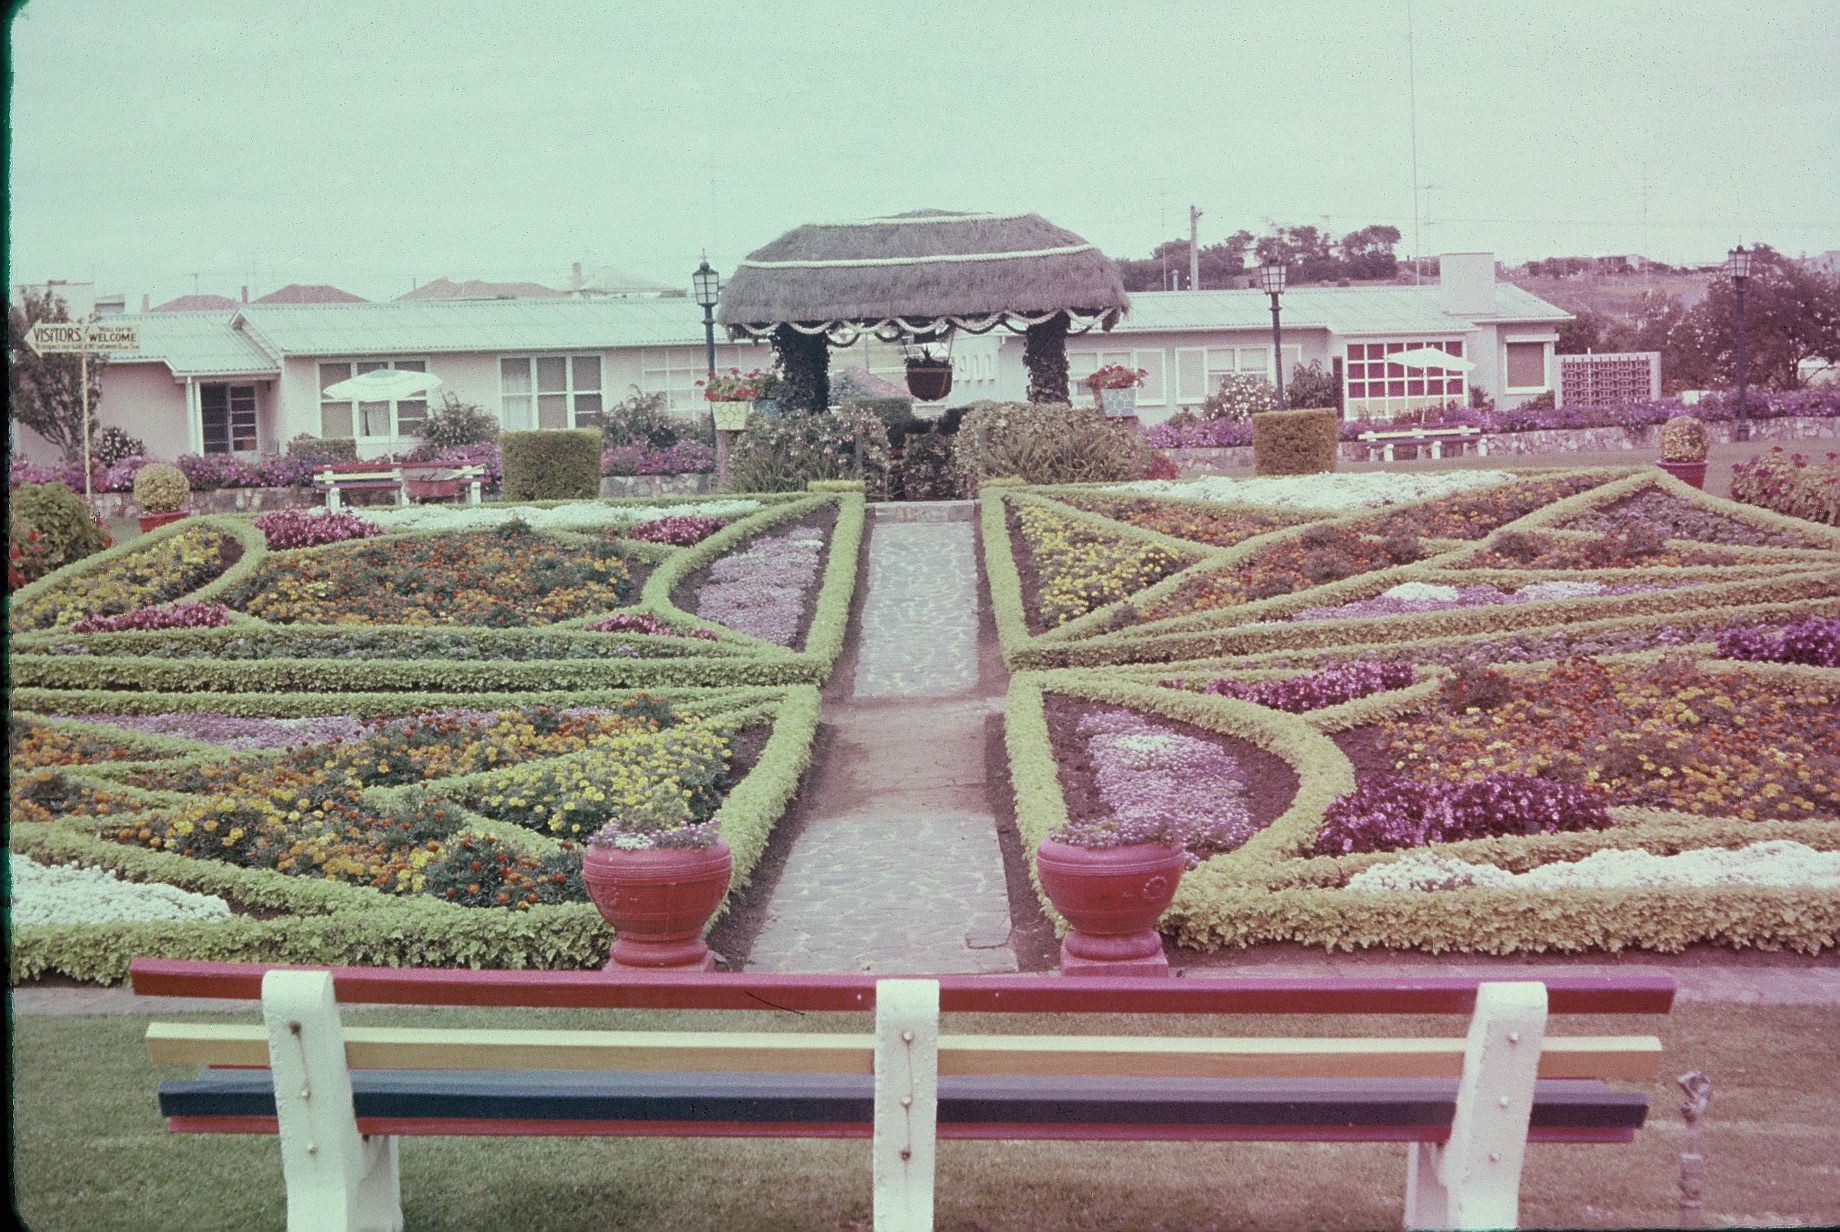 The symmetry and extraordinary manicured detail of the FJ gardens in 1963. Photo: Lindsay Duus